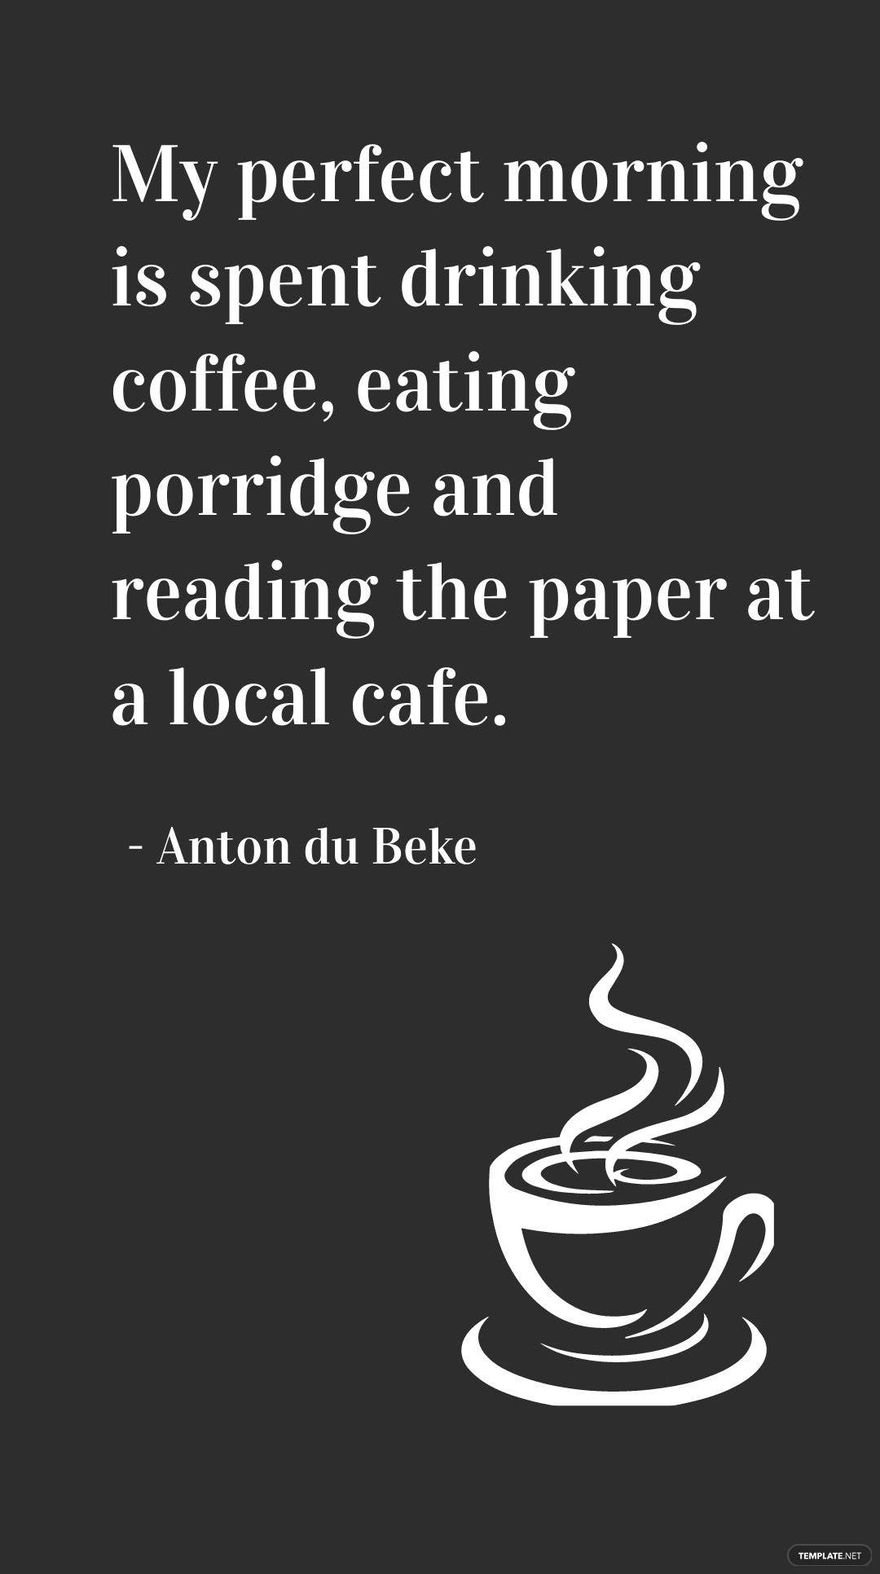 Anton du Beke - My perfect morning is spent drinking coffee, eating porridge and reading the paper at a local cafe.